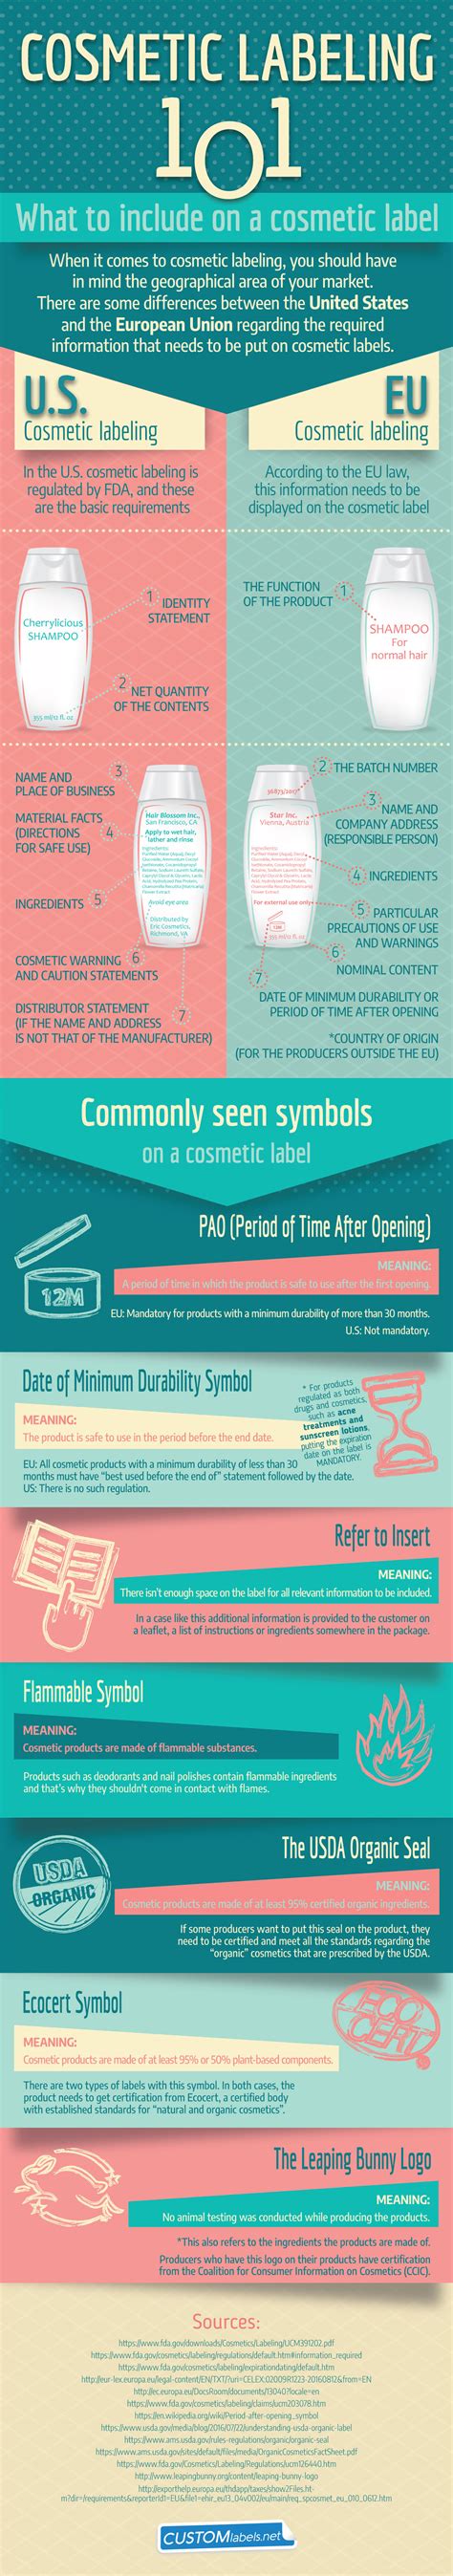 Cosmetic Labeling 101 What To Include When Launching Your Product